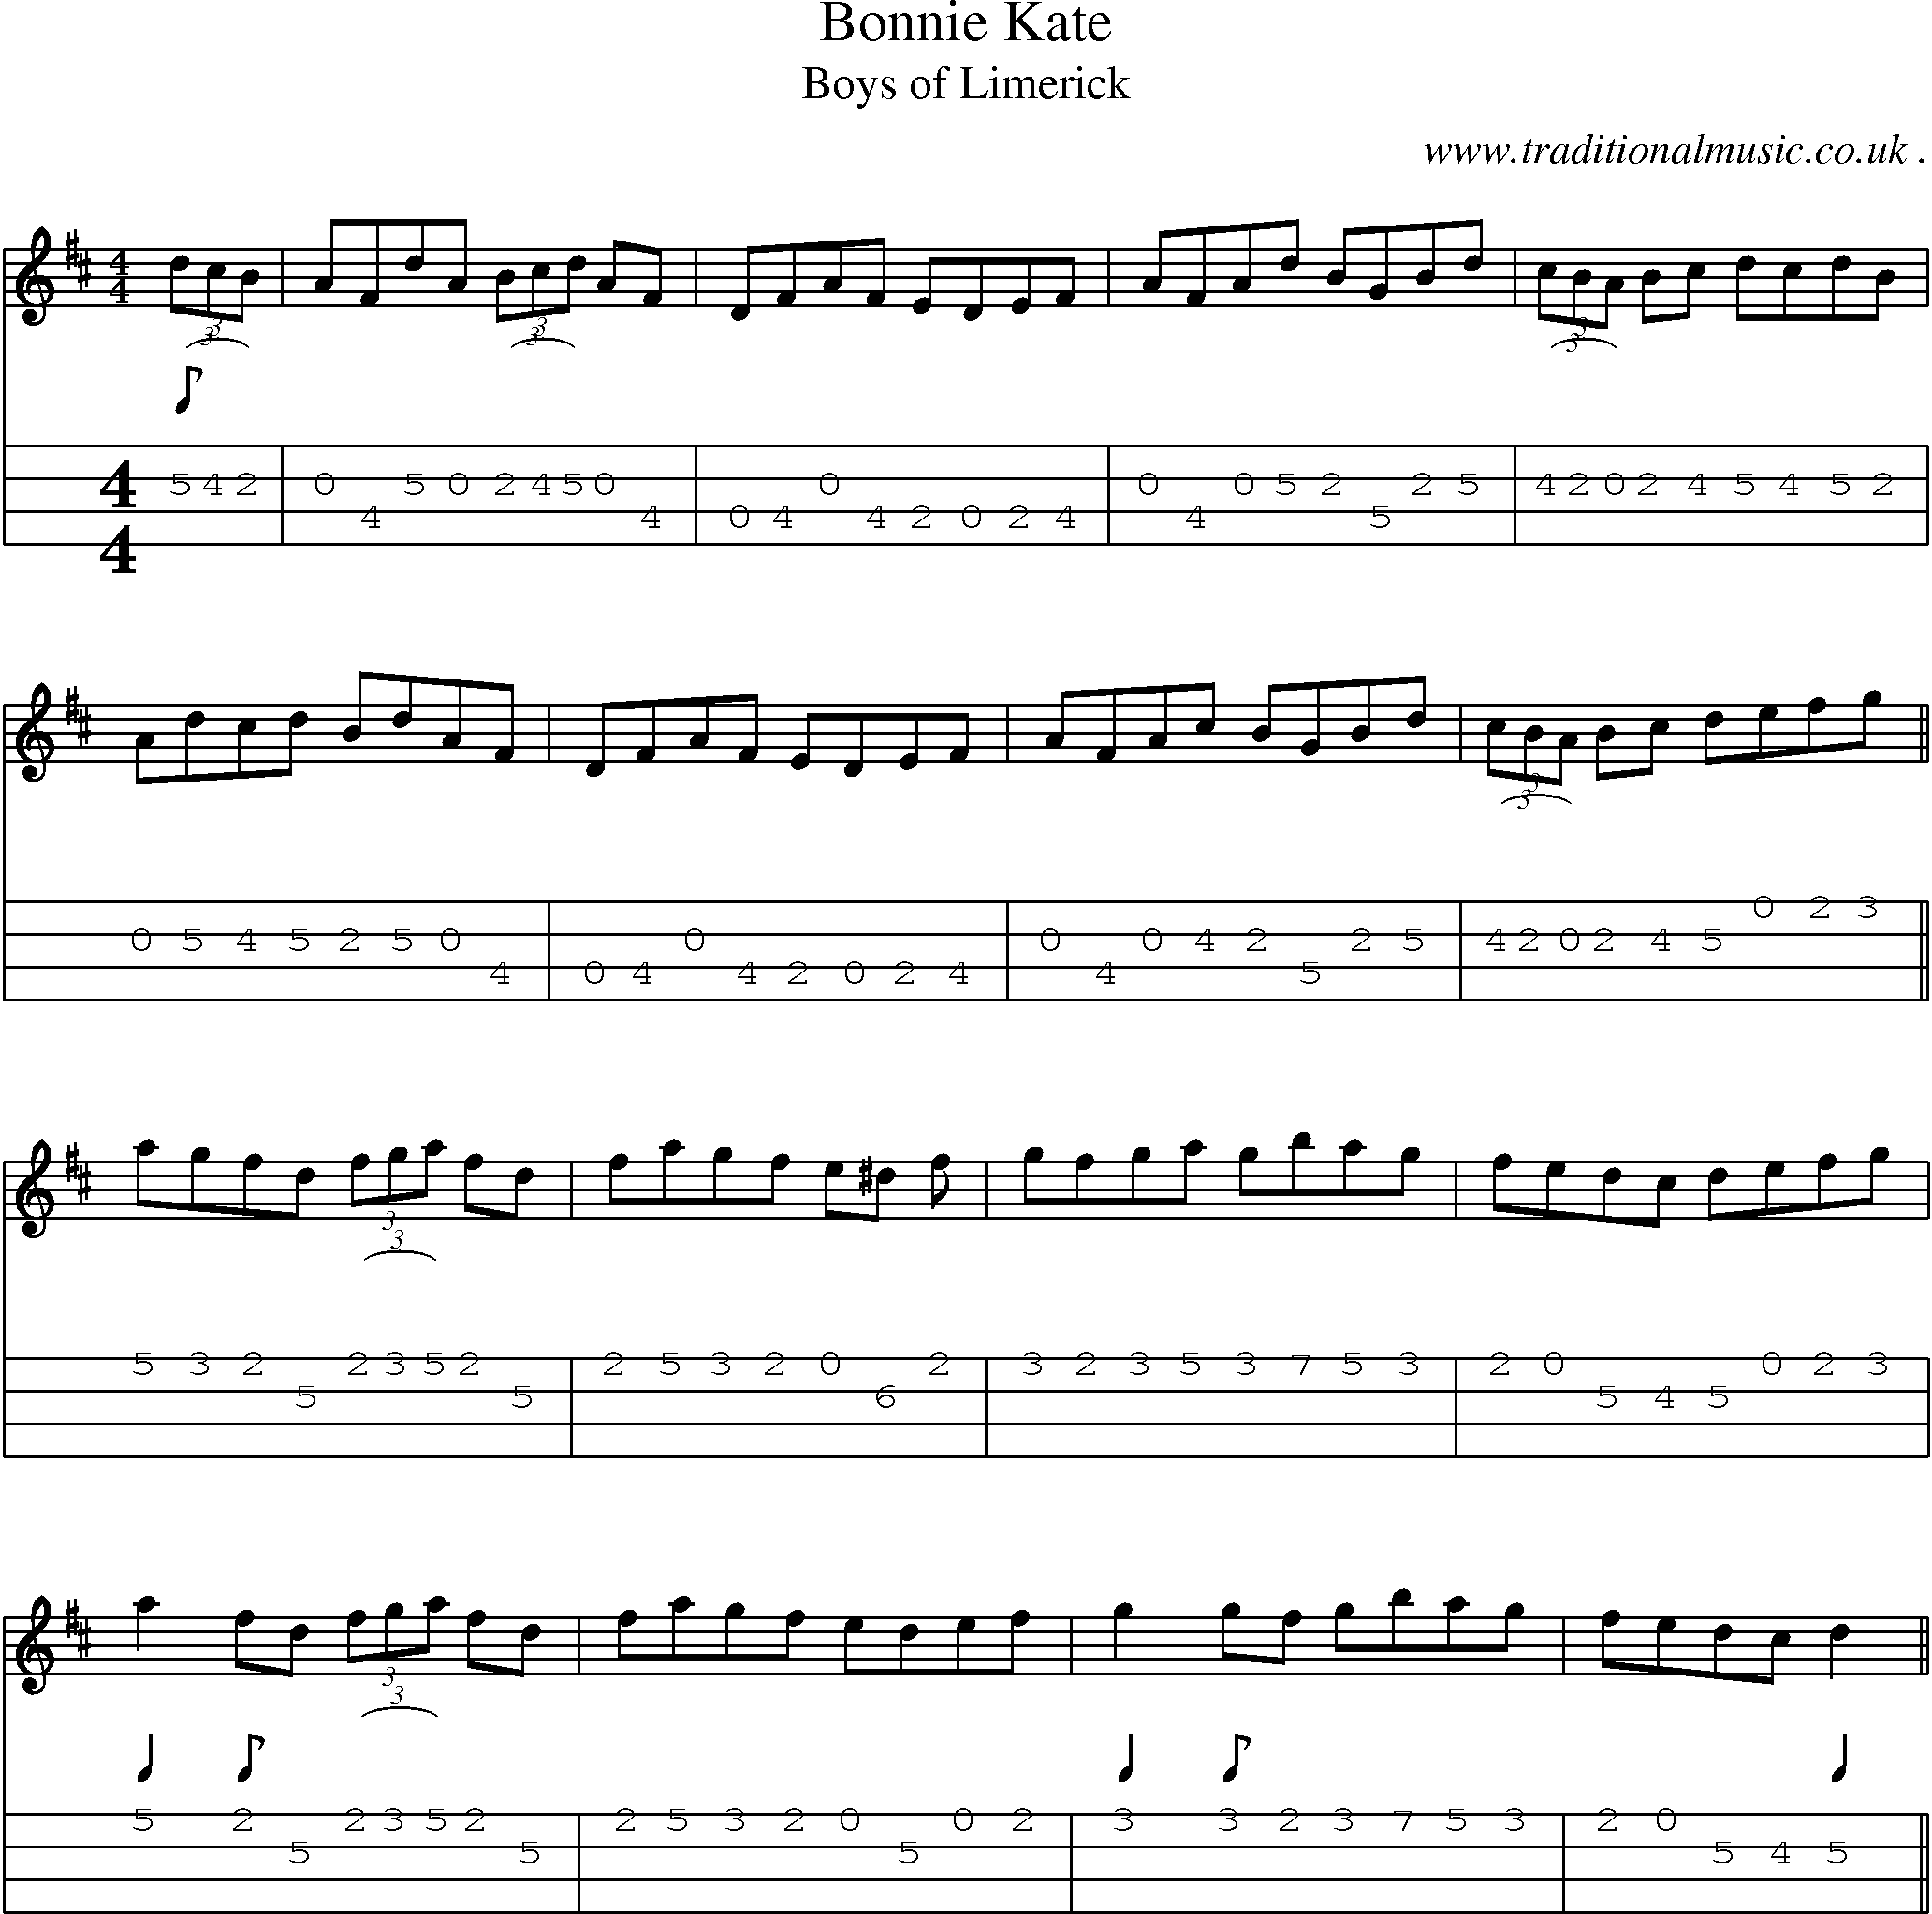 Sheet-music  score, Chords and Mandolin Tabs for Bonnie Kate